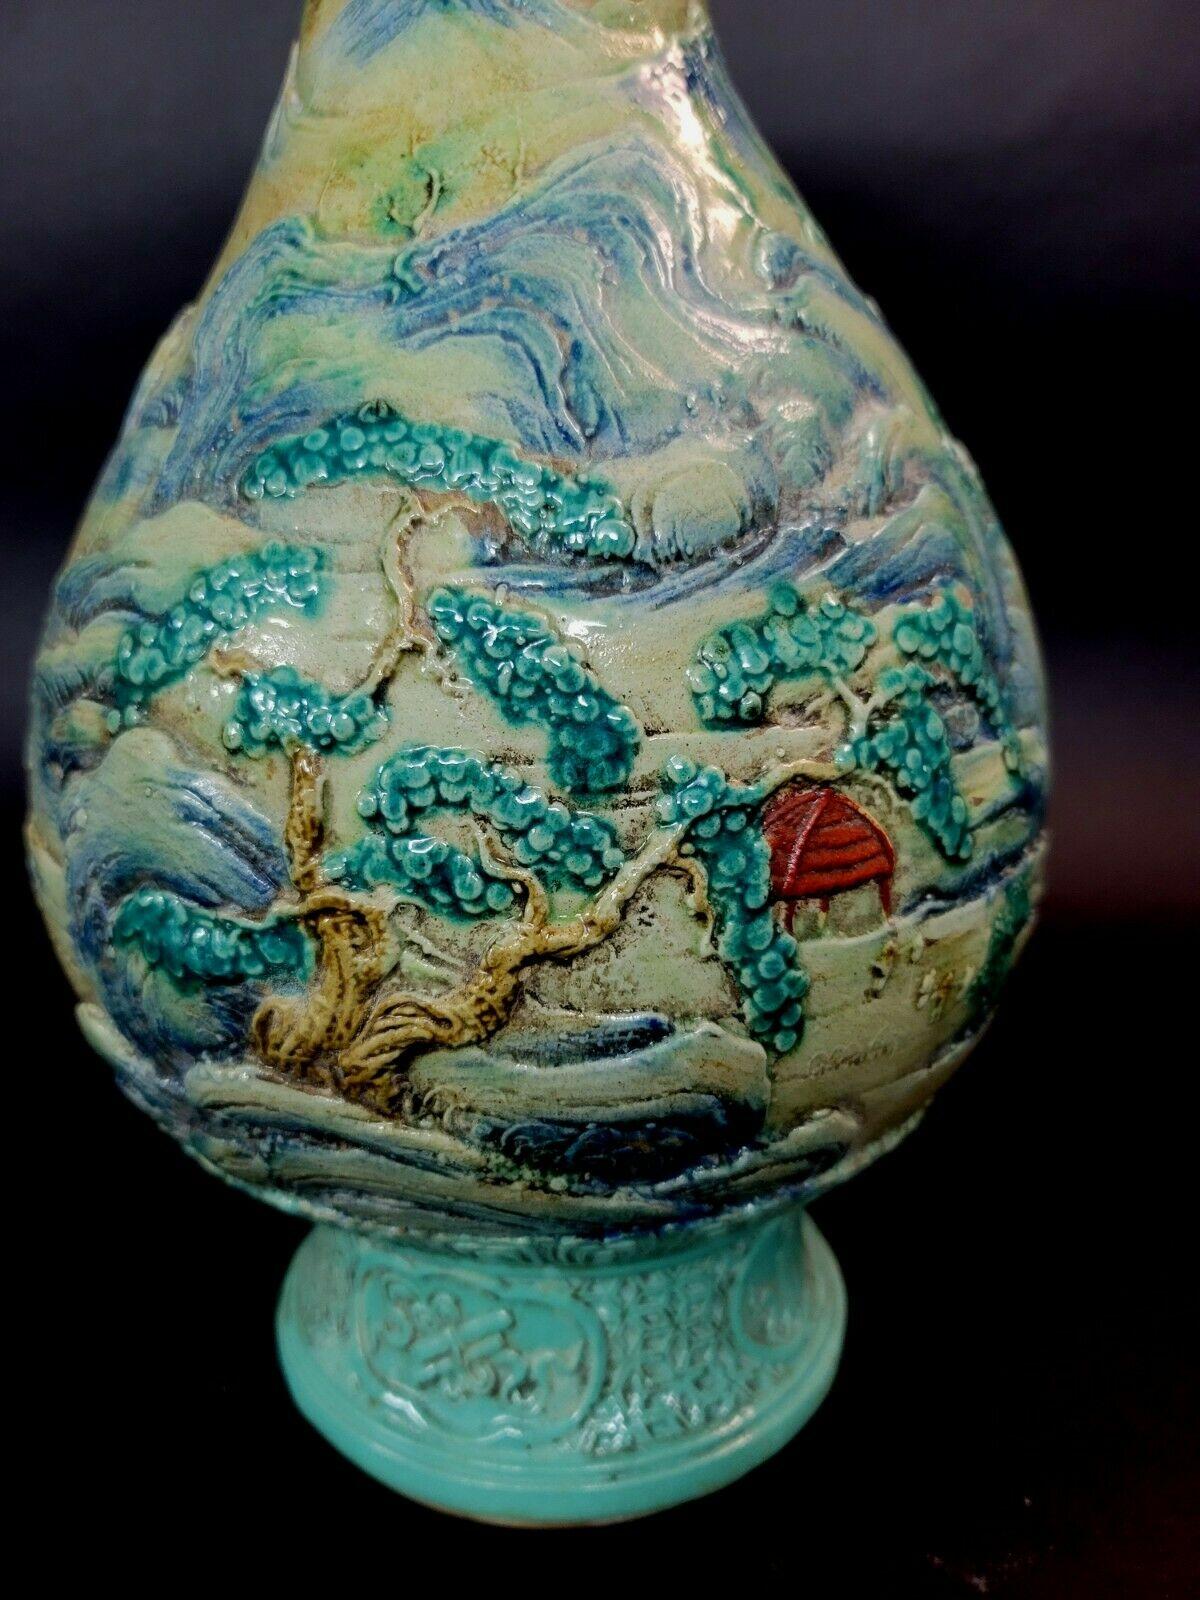 Carved and glazed with a panoramic village scene. A river runs through the village show houses on the riverbanks, fishermen, and mountains in the distance. A red sun is over the horizon. The top and bottom are glazed in turquoise in various borders.